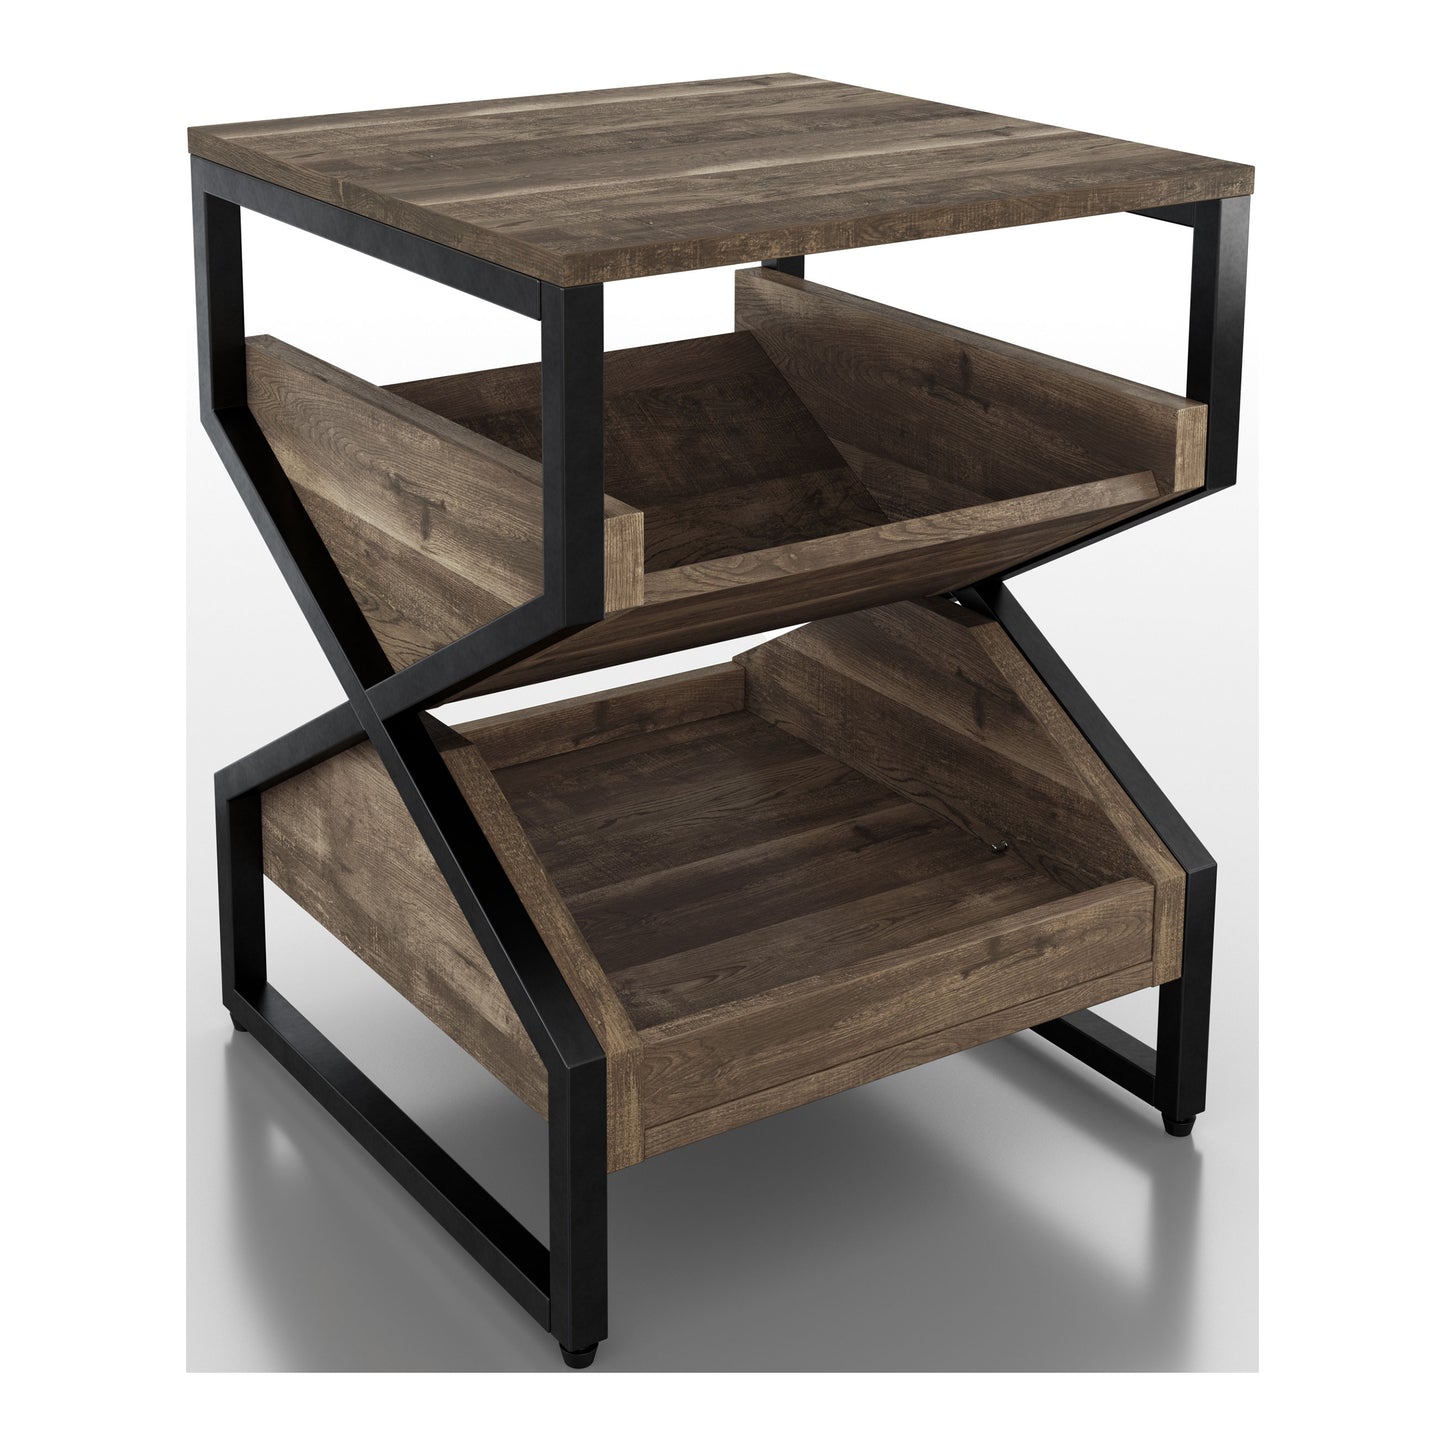 Right angled industrial reclaimed oak end table with a pull-out tray shelf on a white background